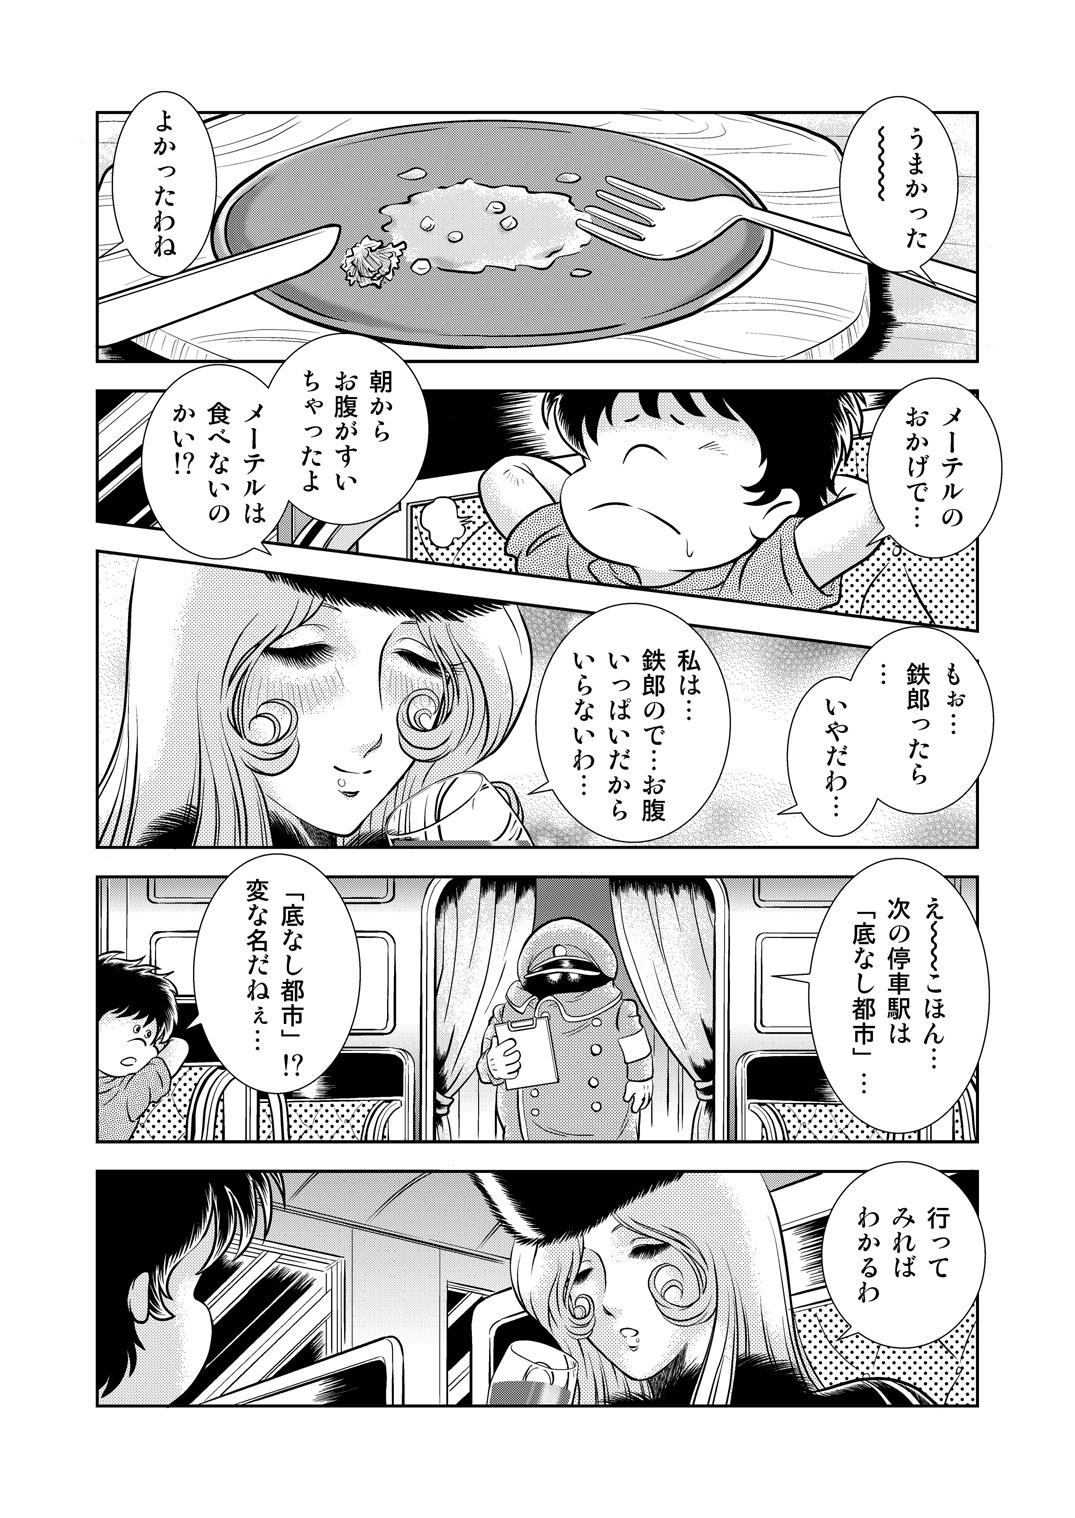 Que Maetel Story 8 - Galaxy express 999 Pool - Page 10